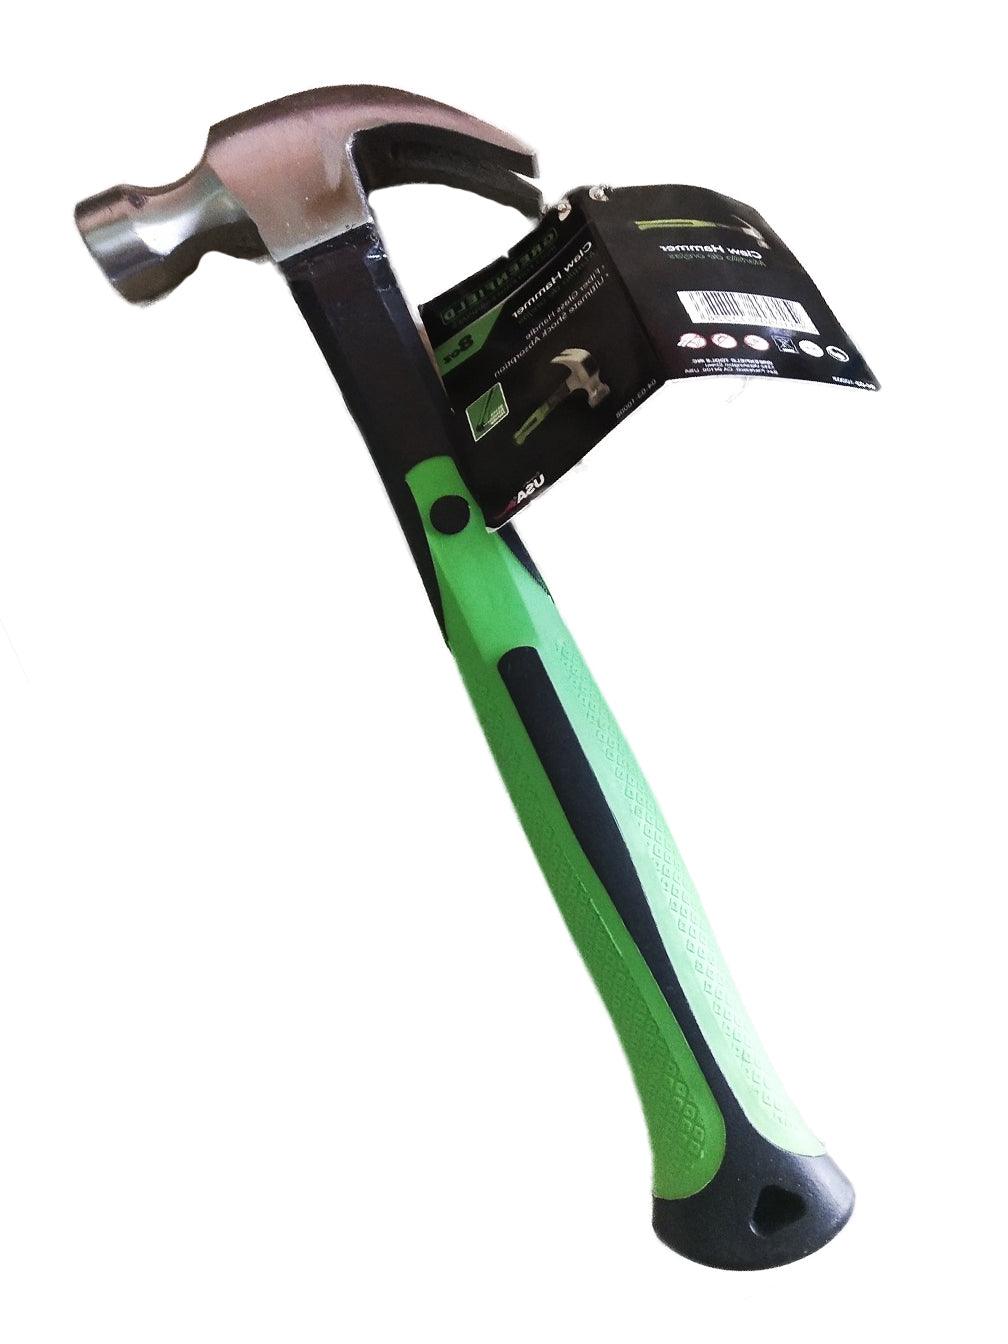 Greenfield Claw Hammer F/G Handle | Greenfield by KHM Megatools Corp.